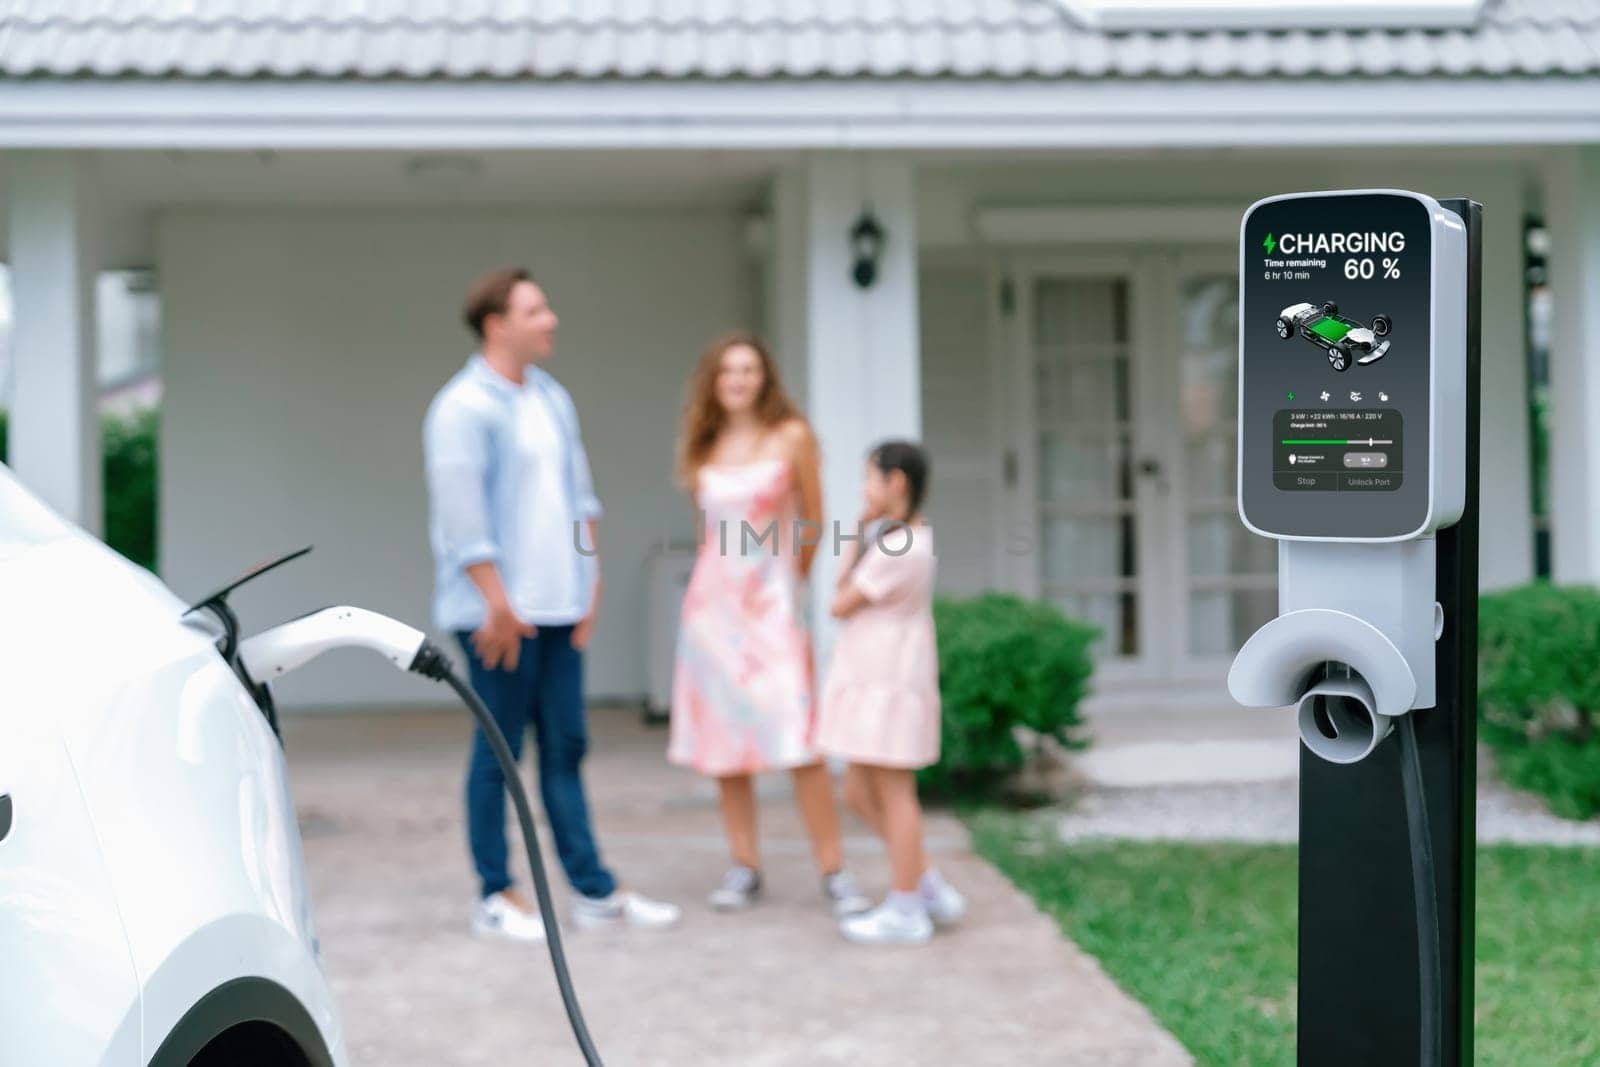 Focused electric vehicle recharging battery by home charging station. Synchronos by biancoblue